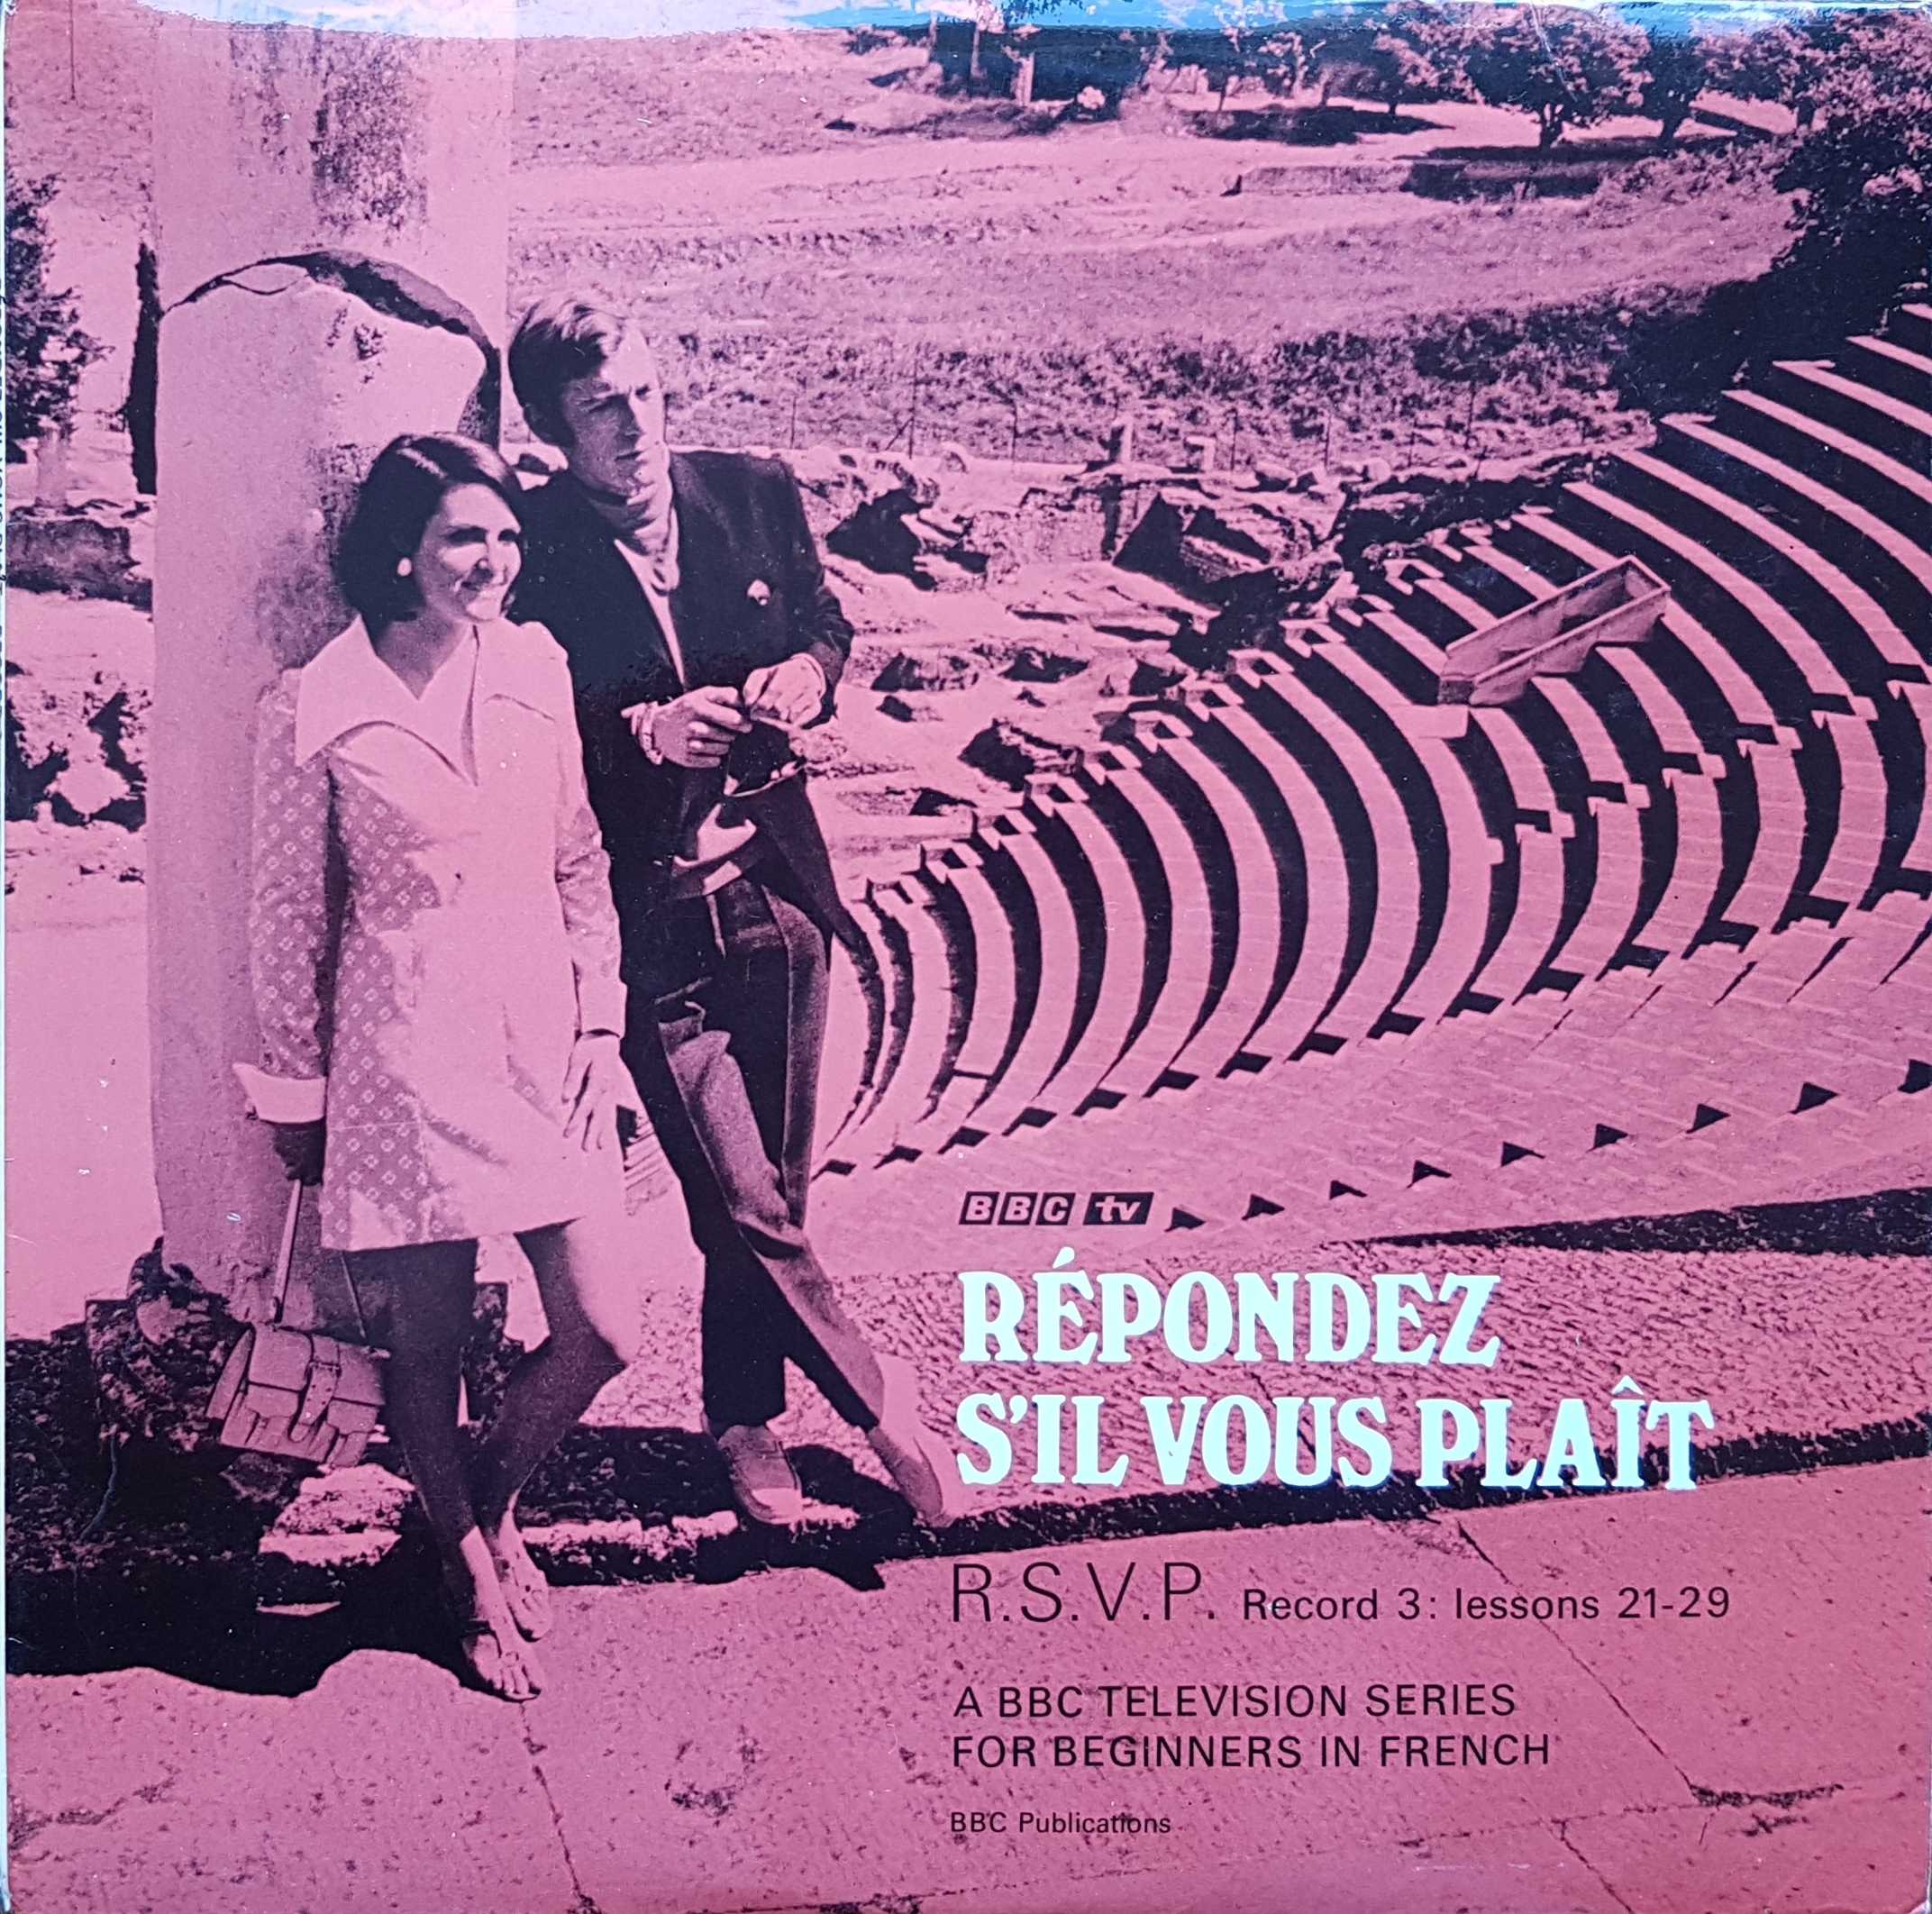 Picture of OP 143/144 Respondez s'll vous plait R. S. V. P. - Lessons 21 - 29 by artist Max Bellancourt / Joseph Cremona from the BBC albums - Records and Tapes library